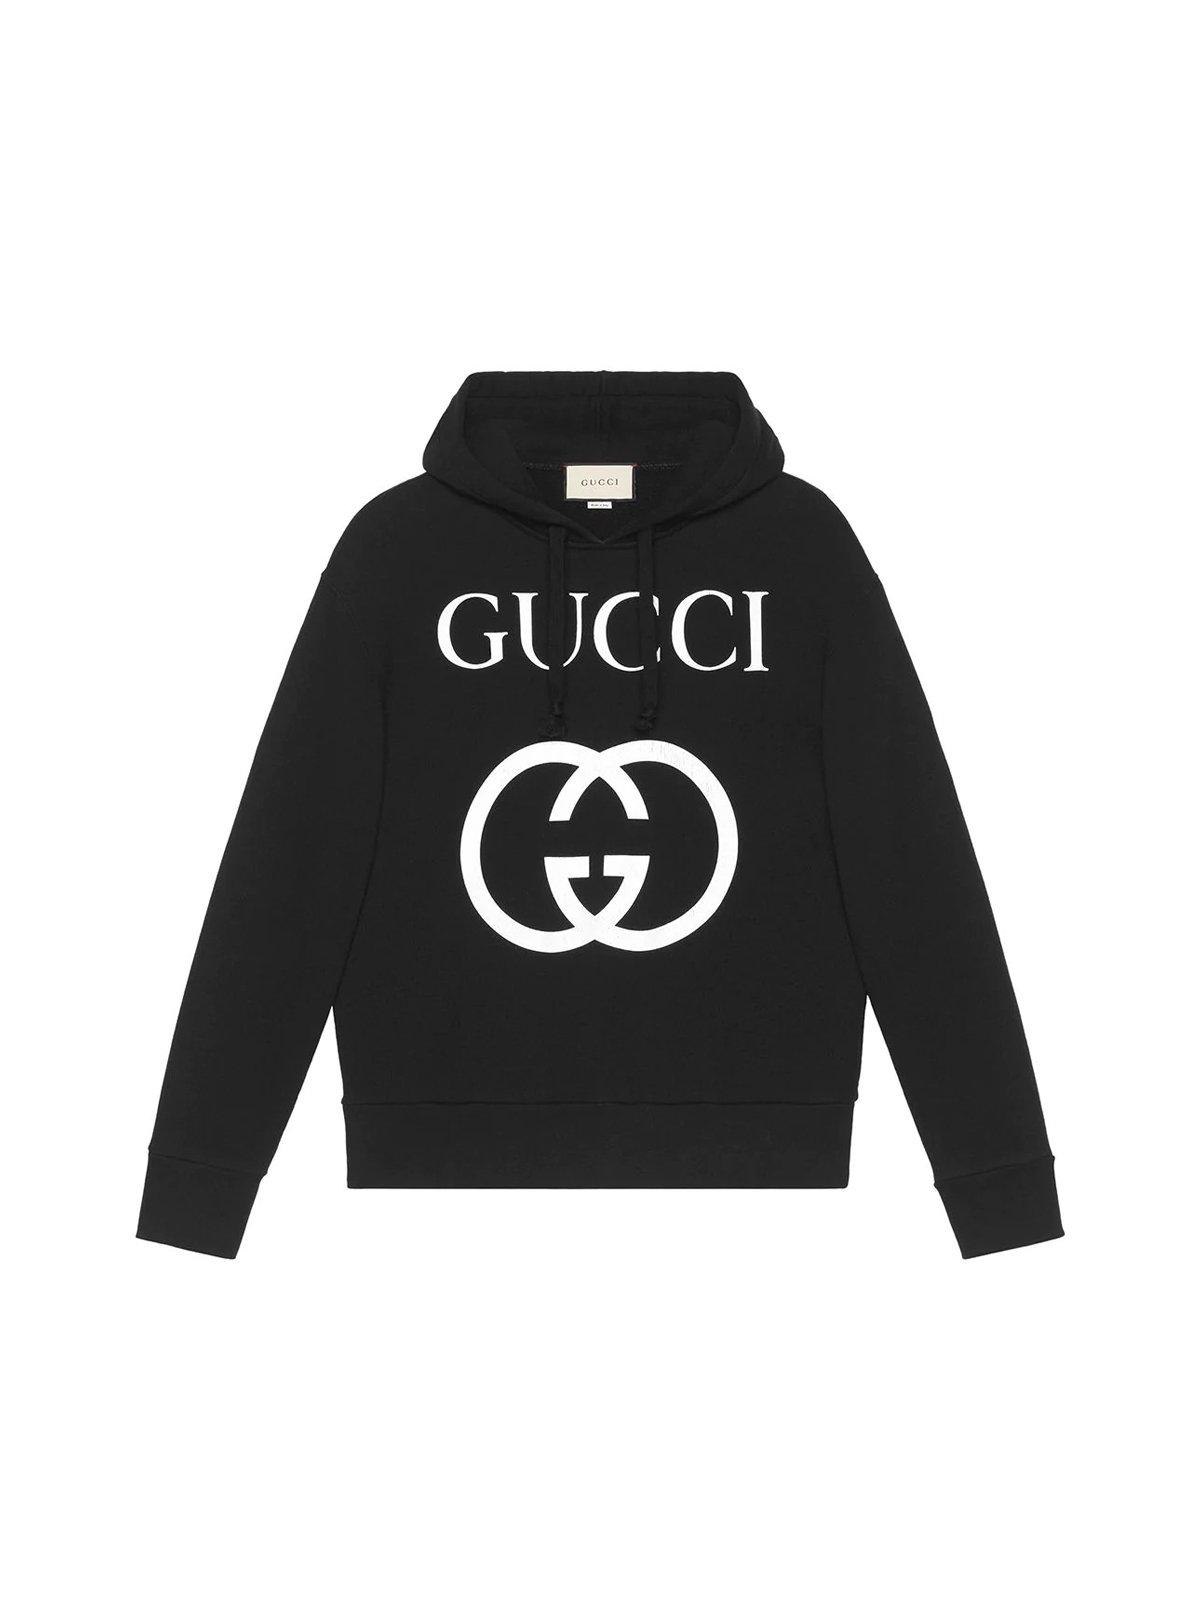 Gucci Cotton Gg Oth Hoodie in Black/Ivory (Black) for Men - Save 40% - Lyst